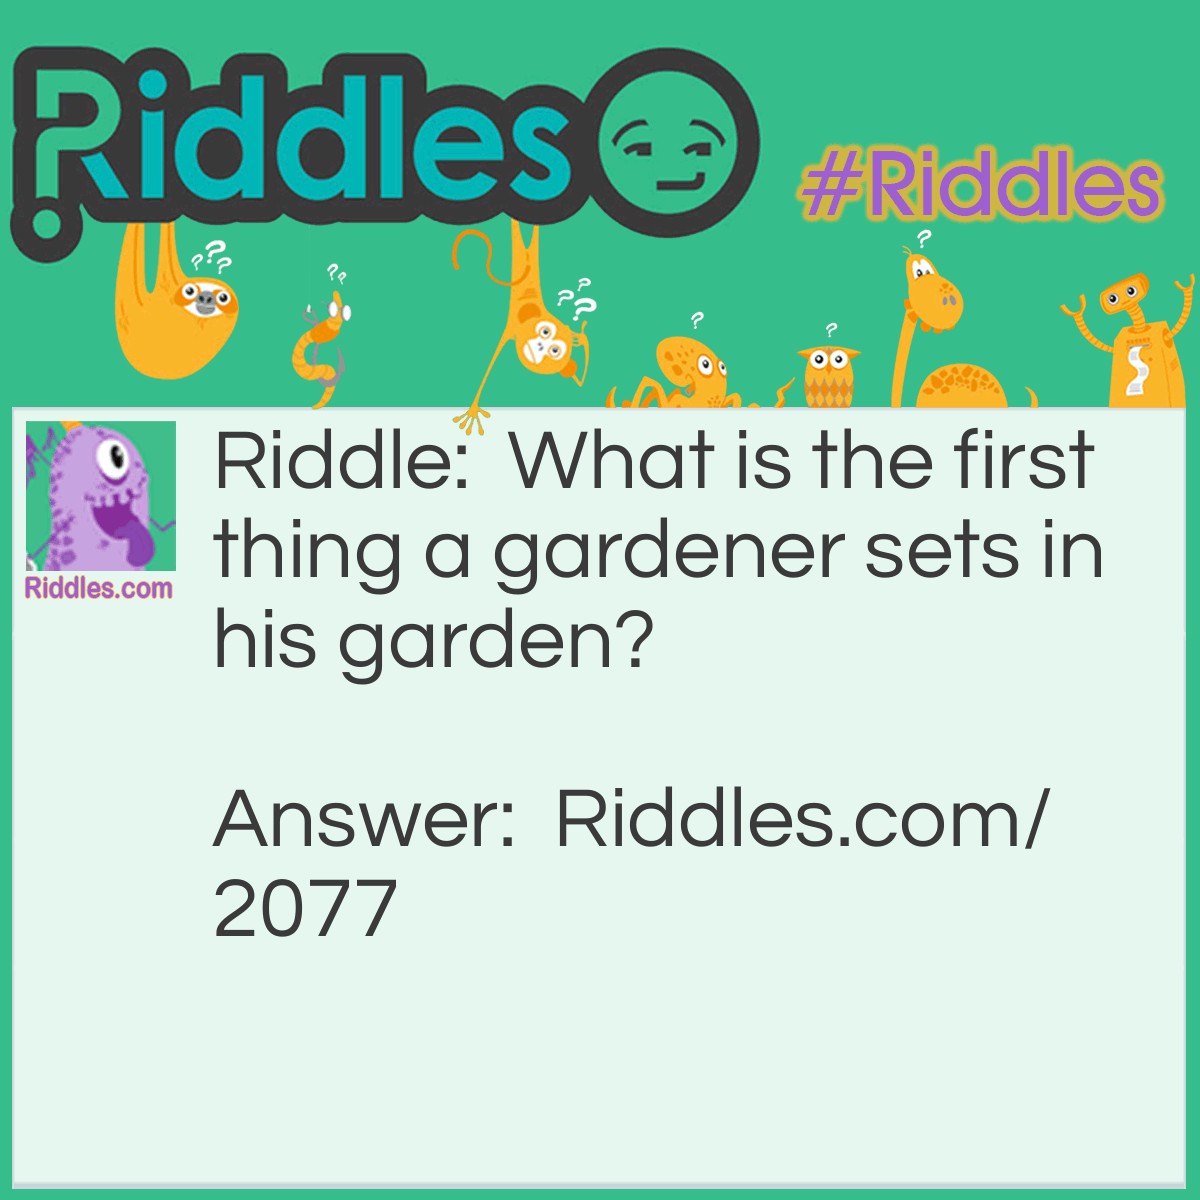 Riddle: What is the first thing a gardener sets in his garden? Answer: His foot.